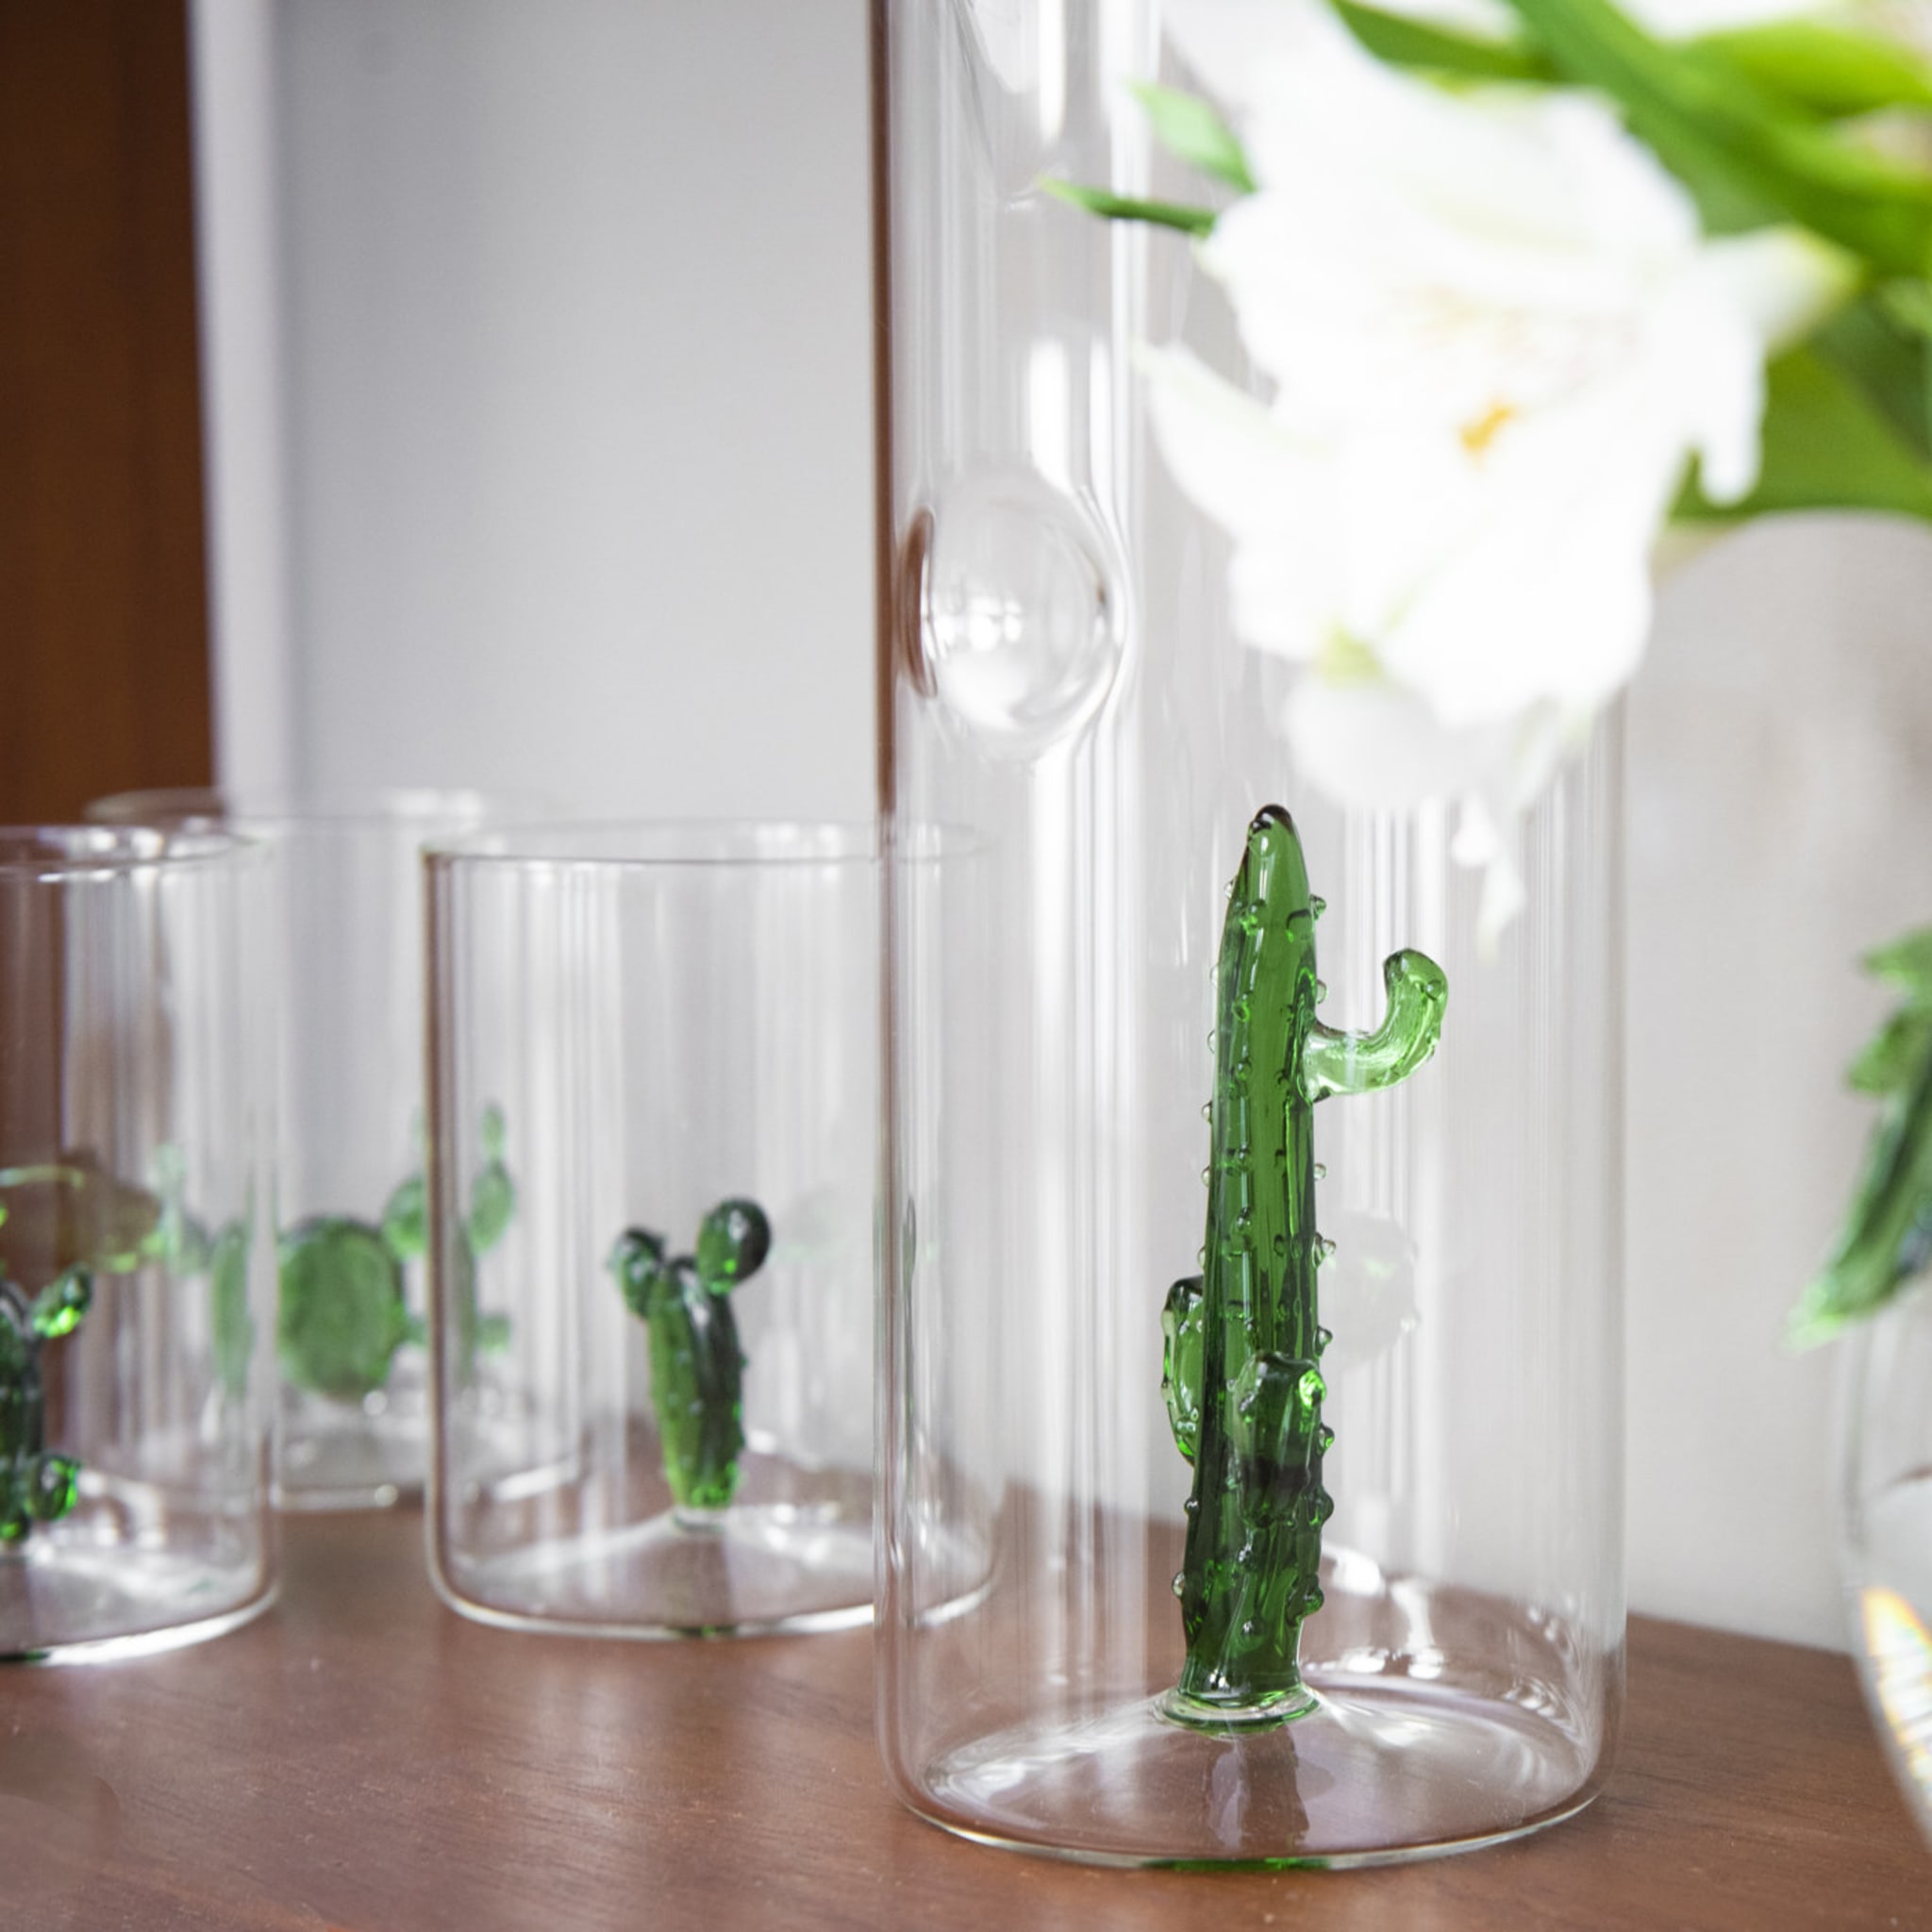 Cactus Set of 4 Glasses and Pitcher - Alternative view 4